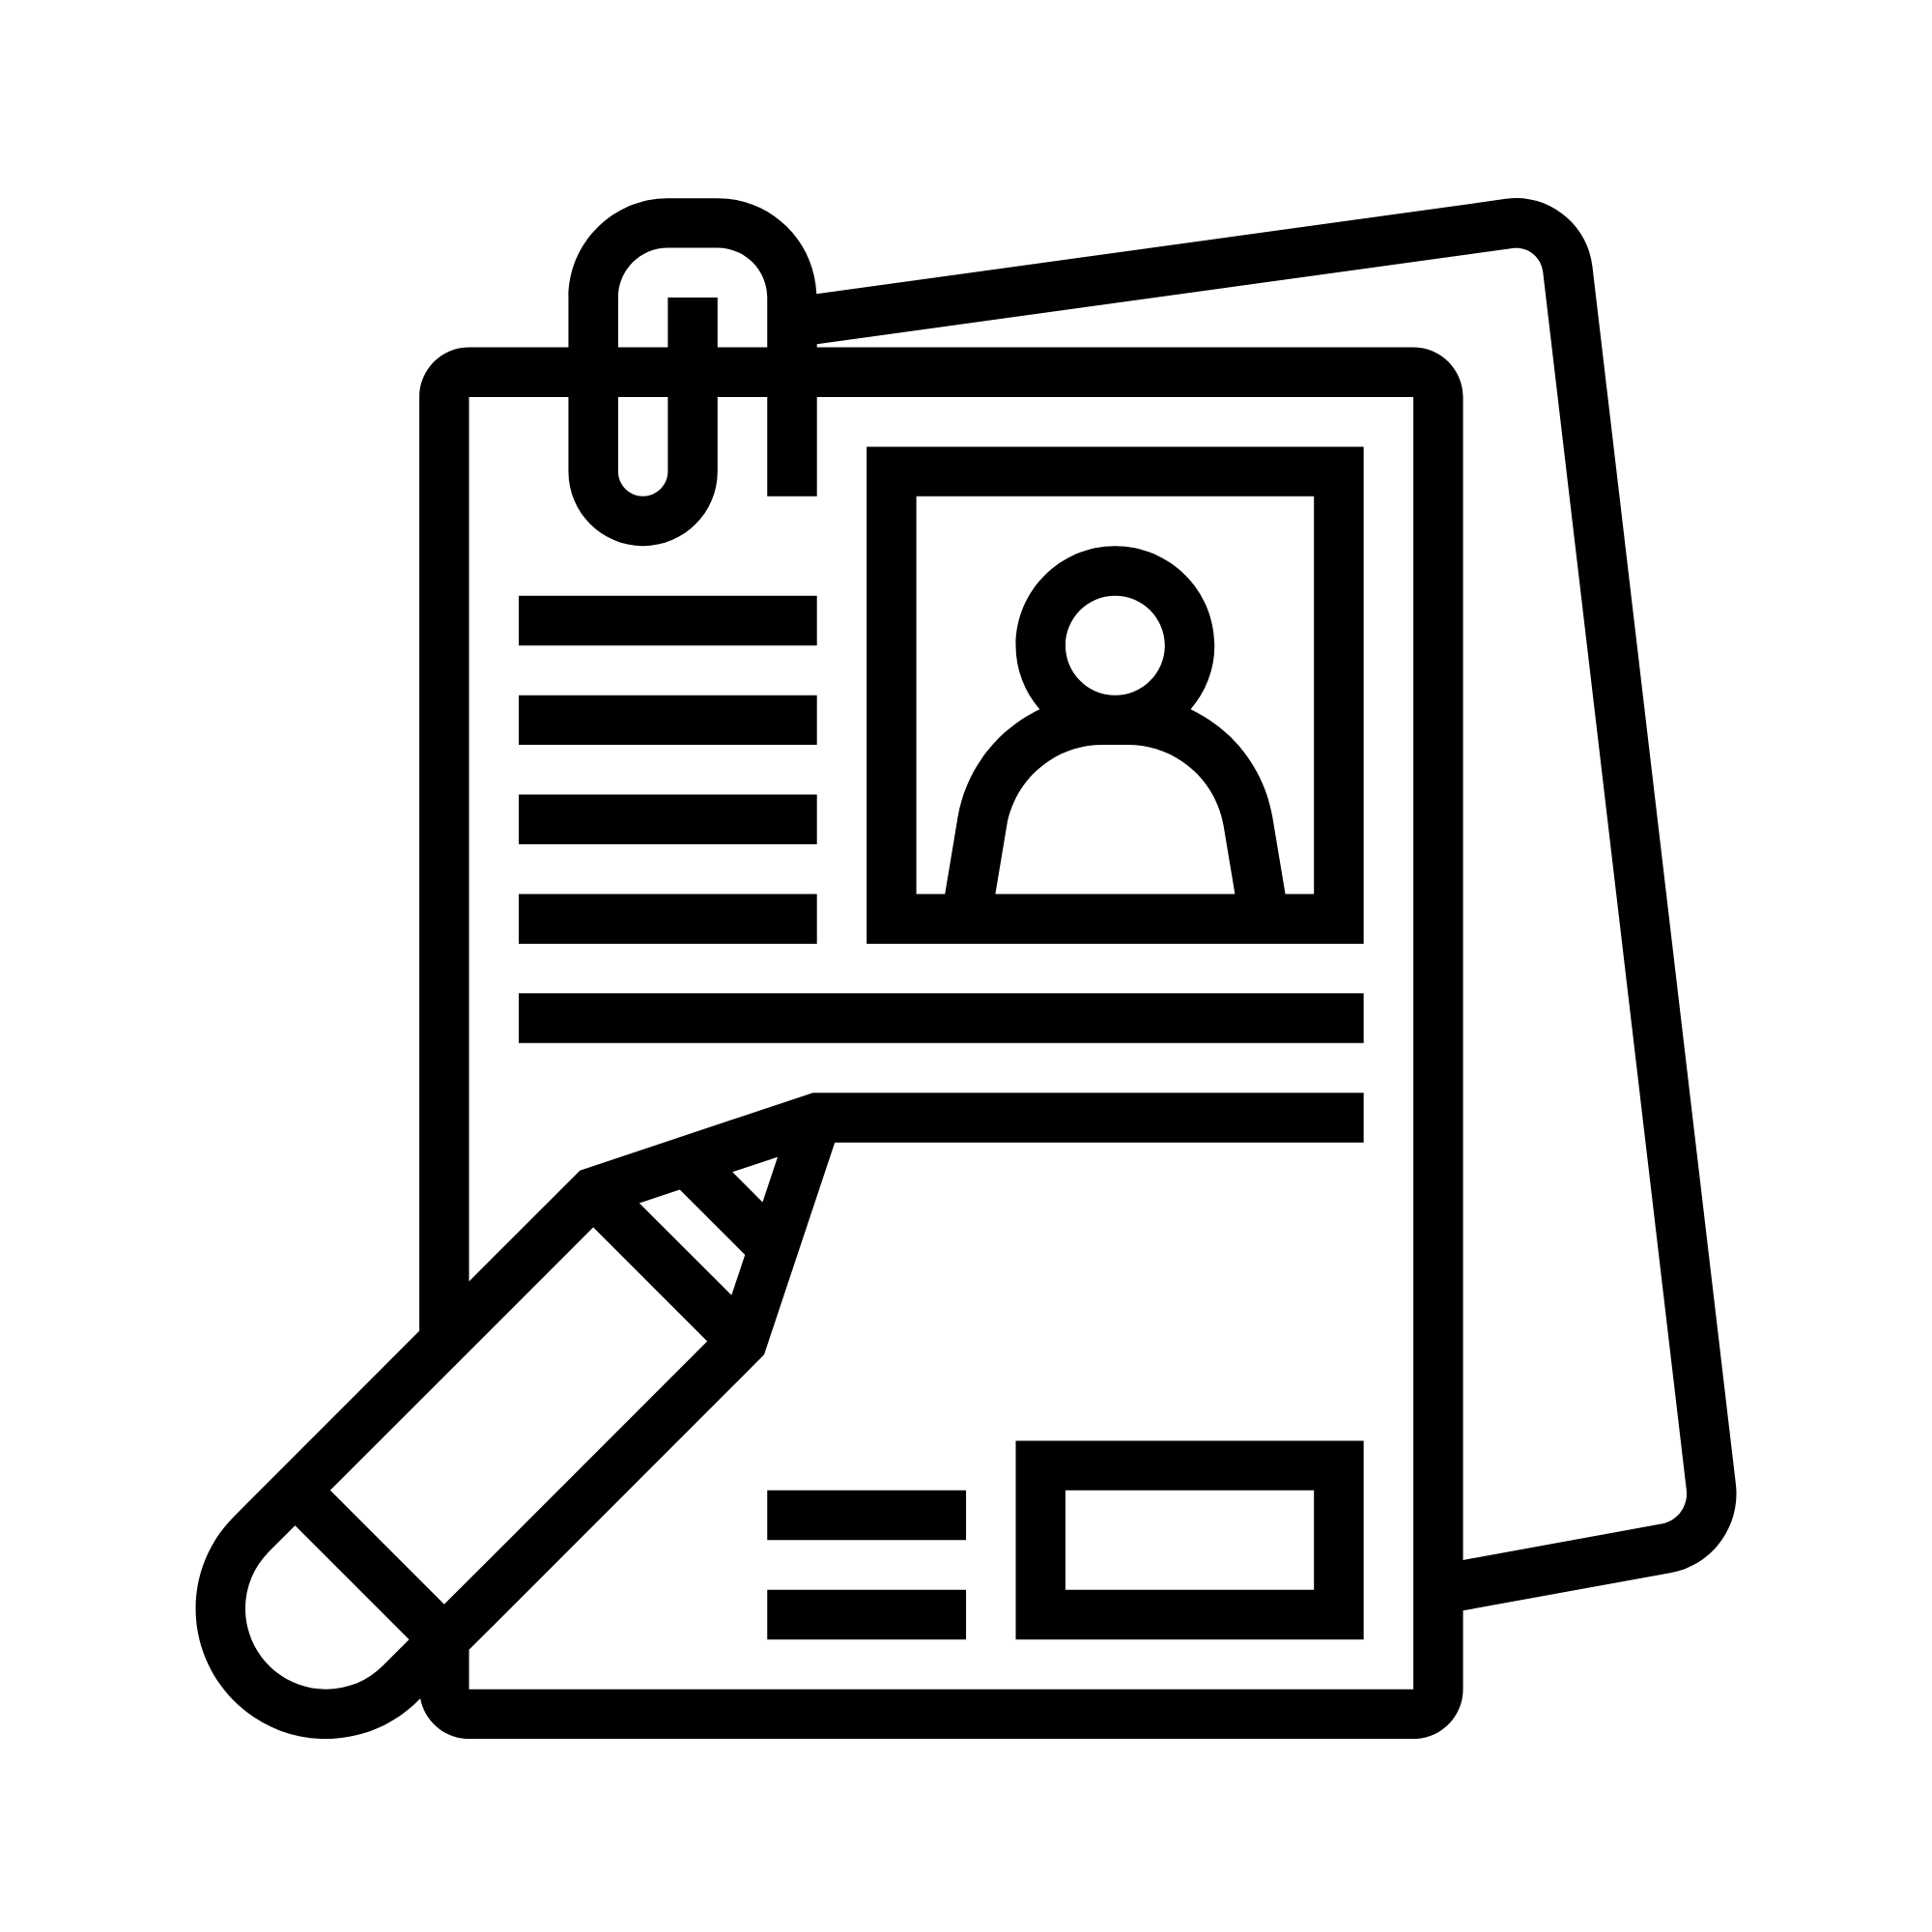 An icon representing an application, featuring a pencil poised above a document, part of IMDA’s AIM Graduate Development Programme